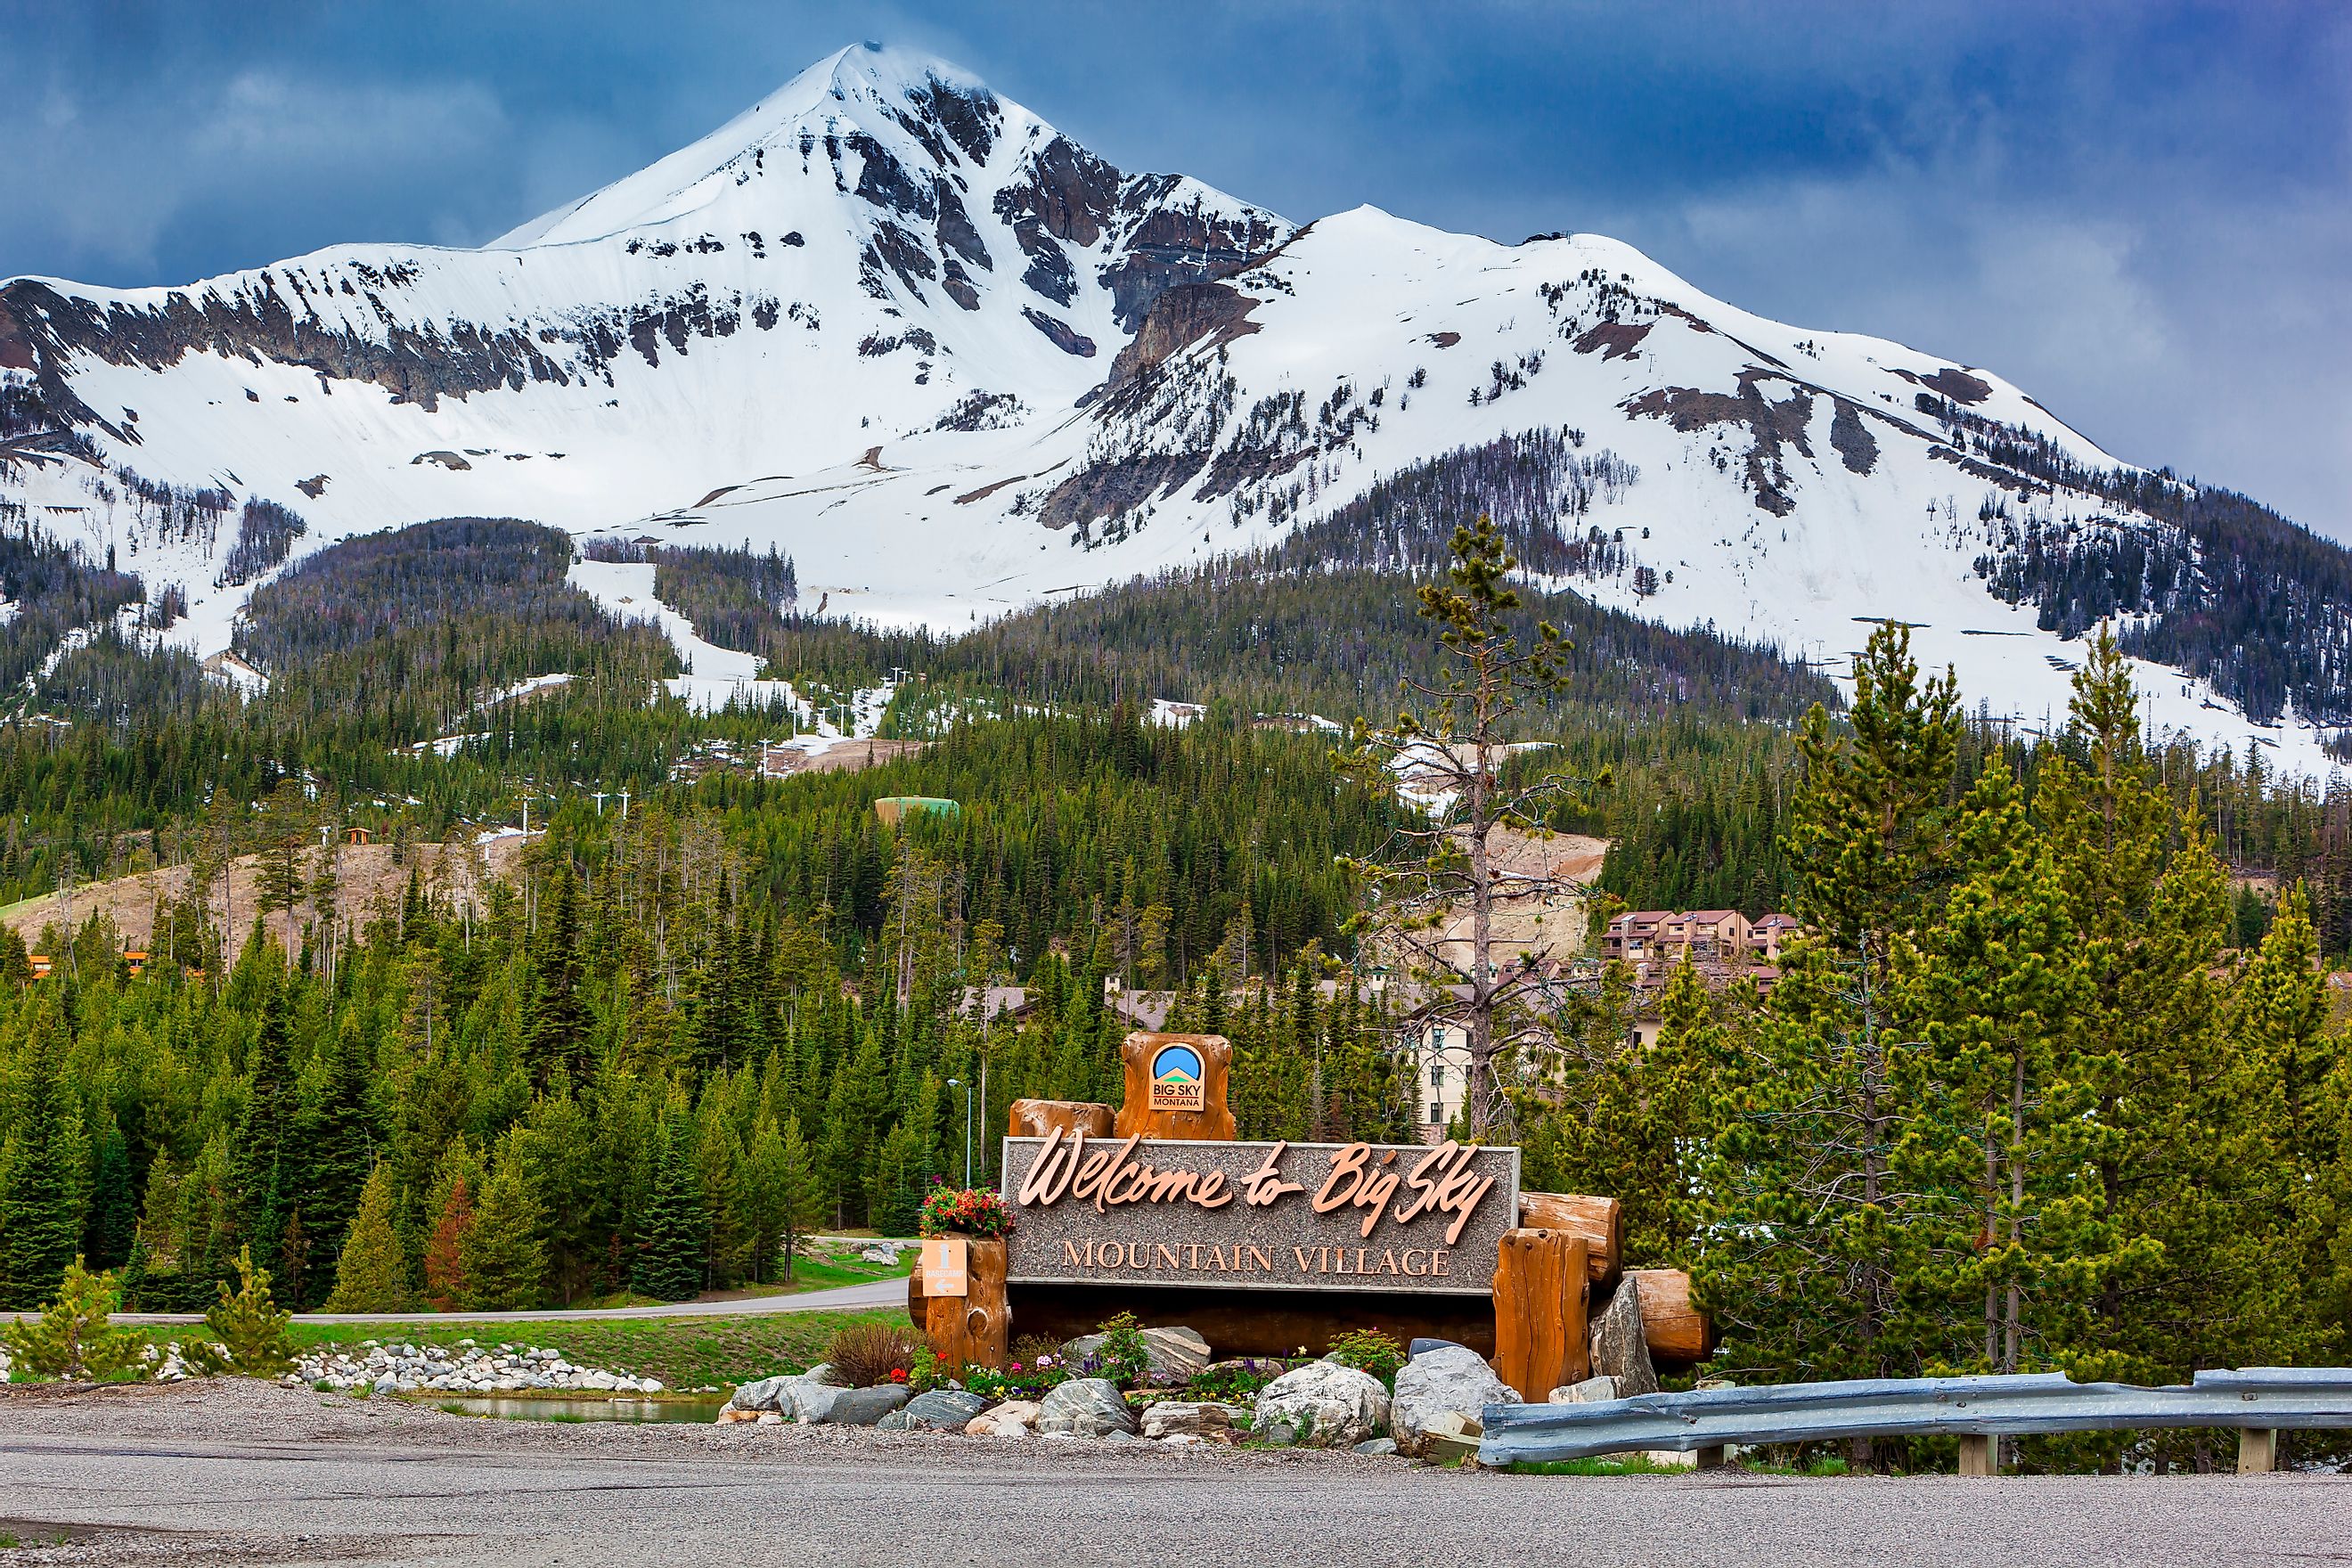 Welcome to Big Sky Mountain Village Signage, dwarfed by the enormity of Lone Mountain full of snow in the Madison Range in the state of Montana. Editorial credit: Zorro Stock Images / Shutterstock.com